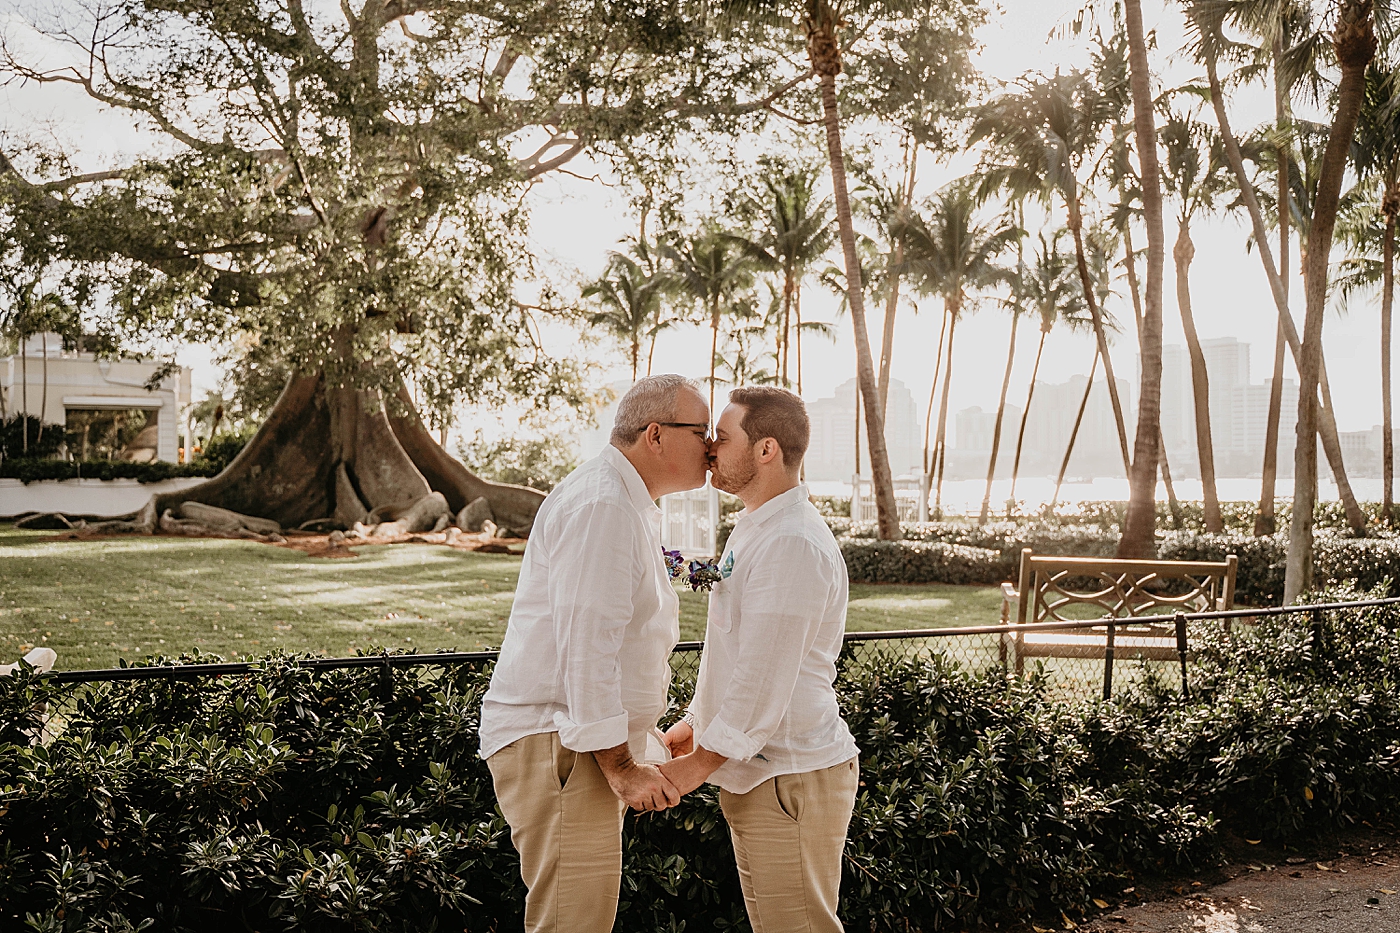 Grooms kissing in front of Banyan tree Palm Beach Elopement Photography captured by South Florida Photographer Krystal Capone Photography 